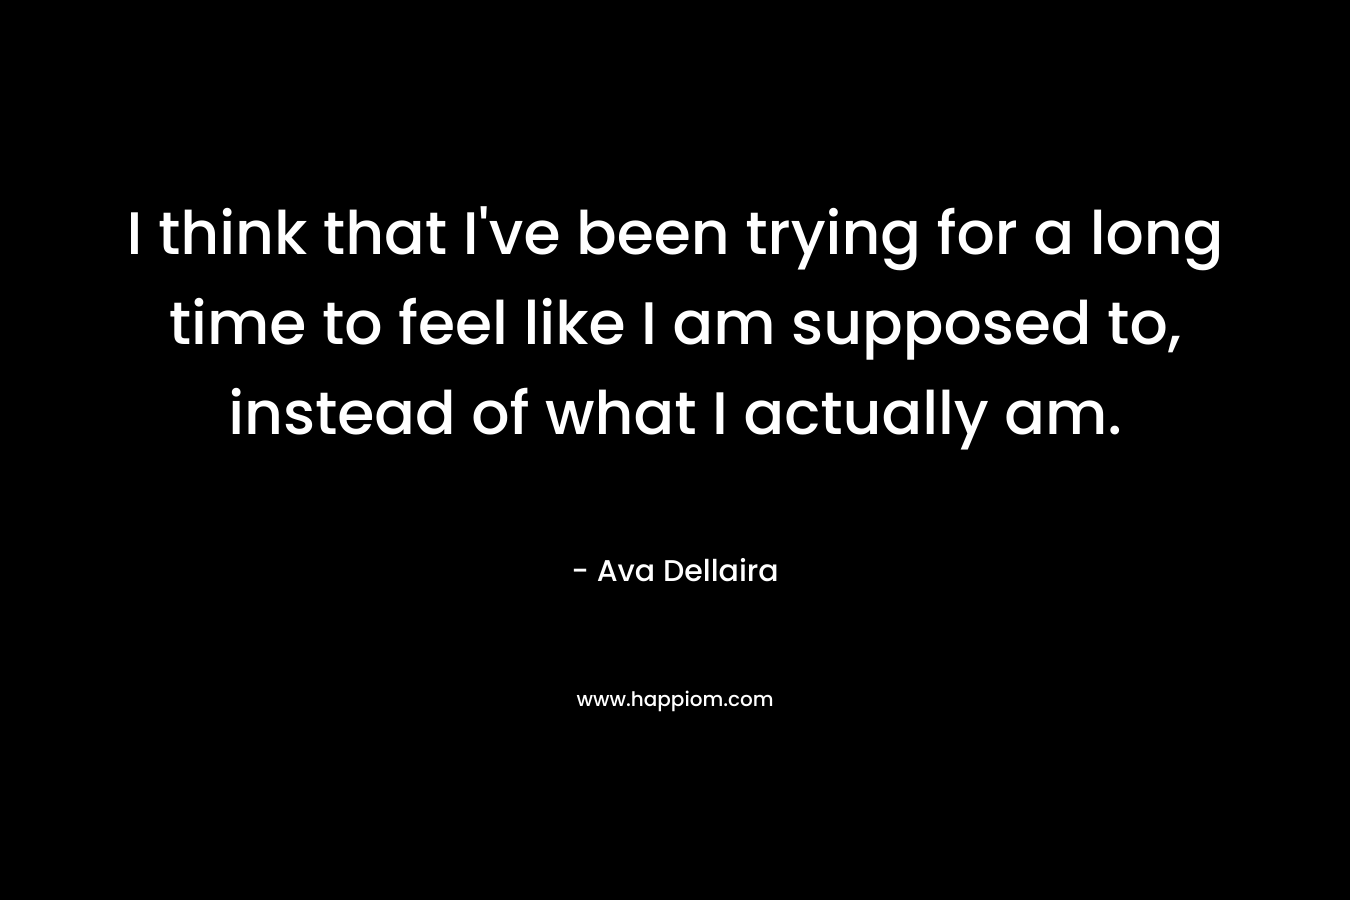 I think that I’ve been trying for a long time to feel like I am supposed to, instead of what I actually am. – Ava Dellaira